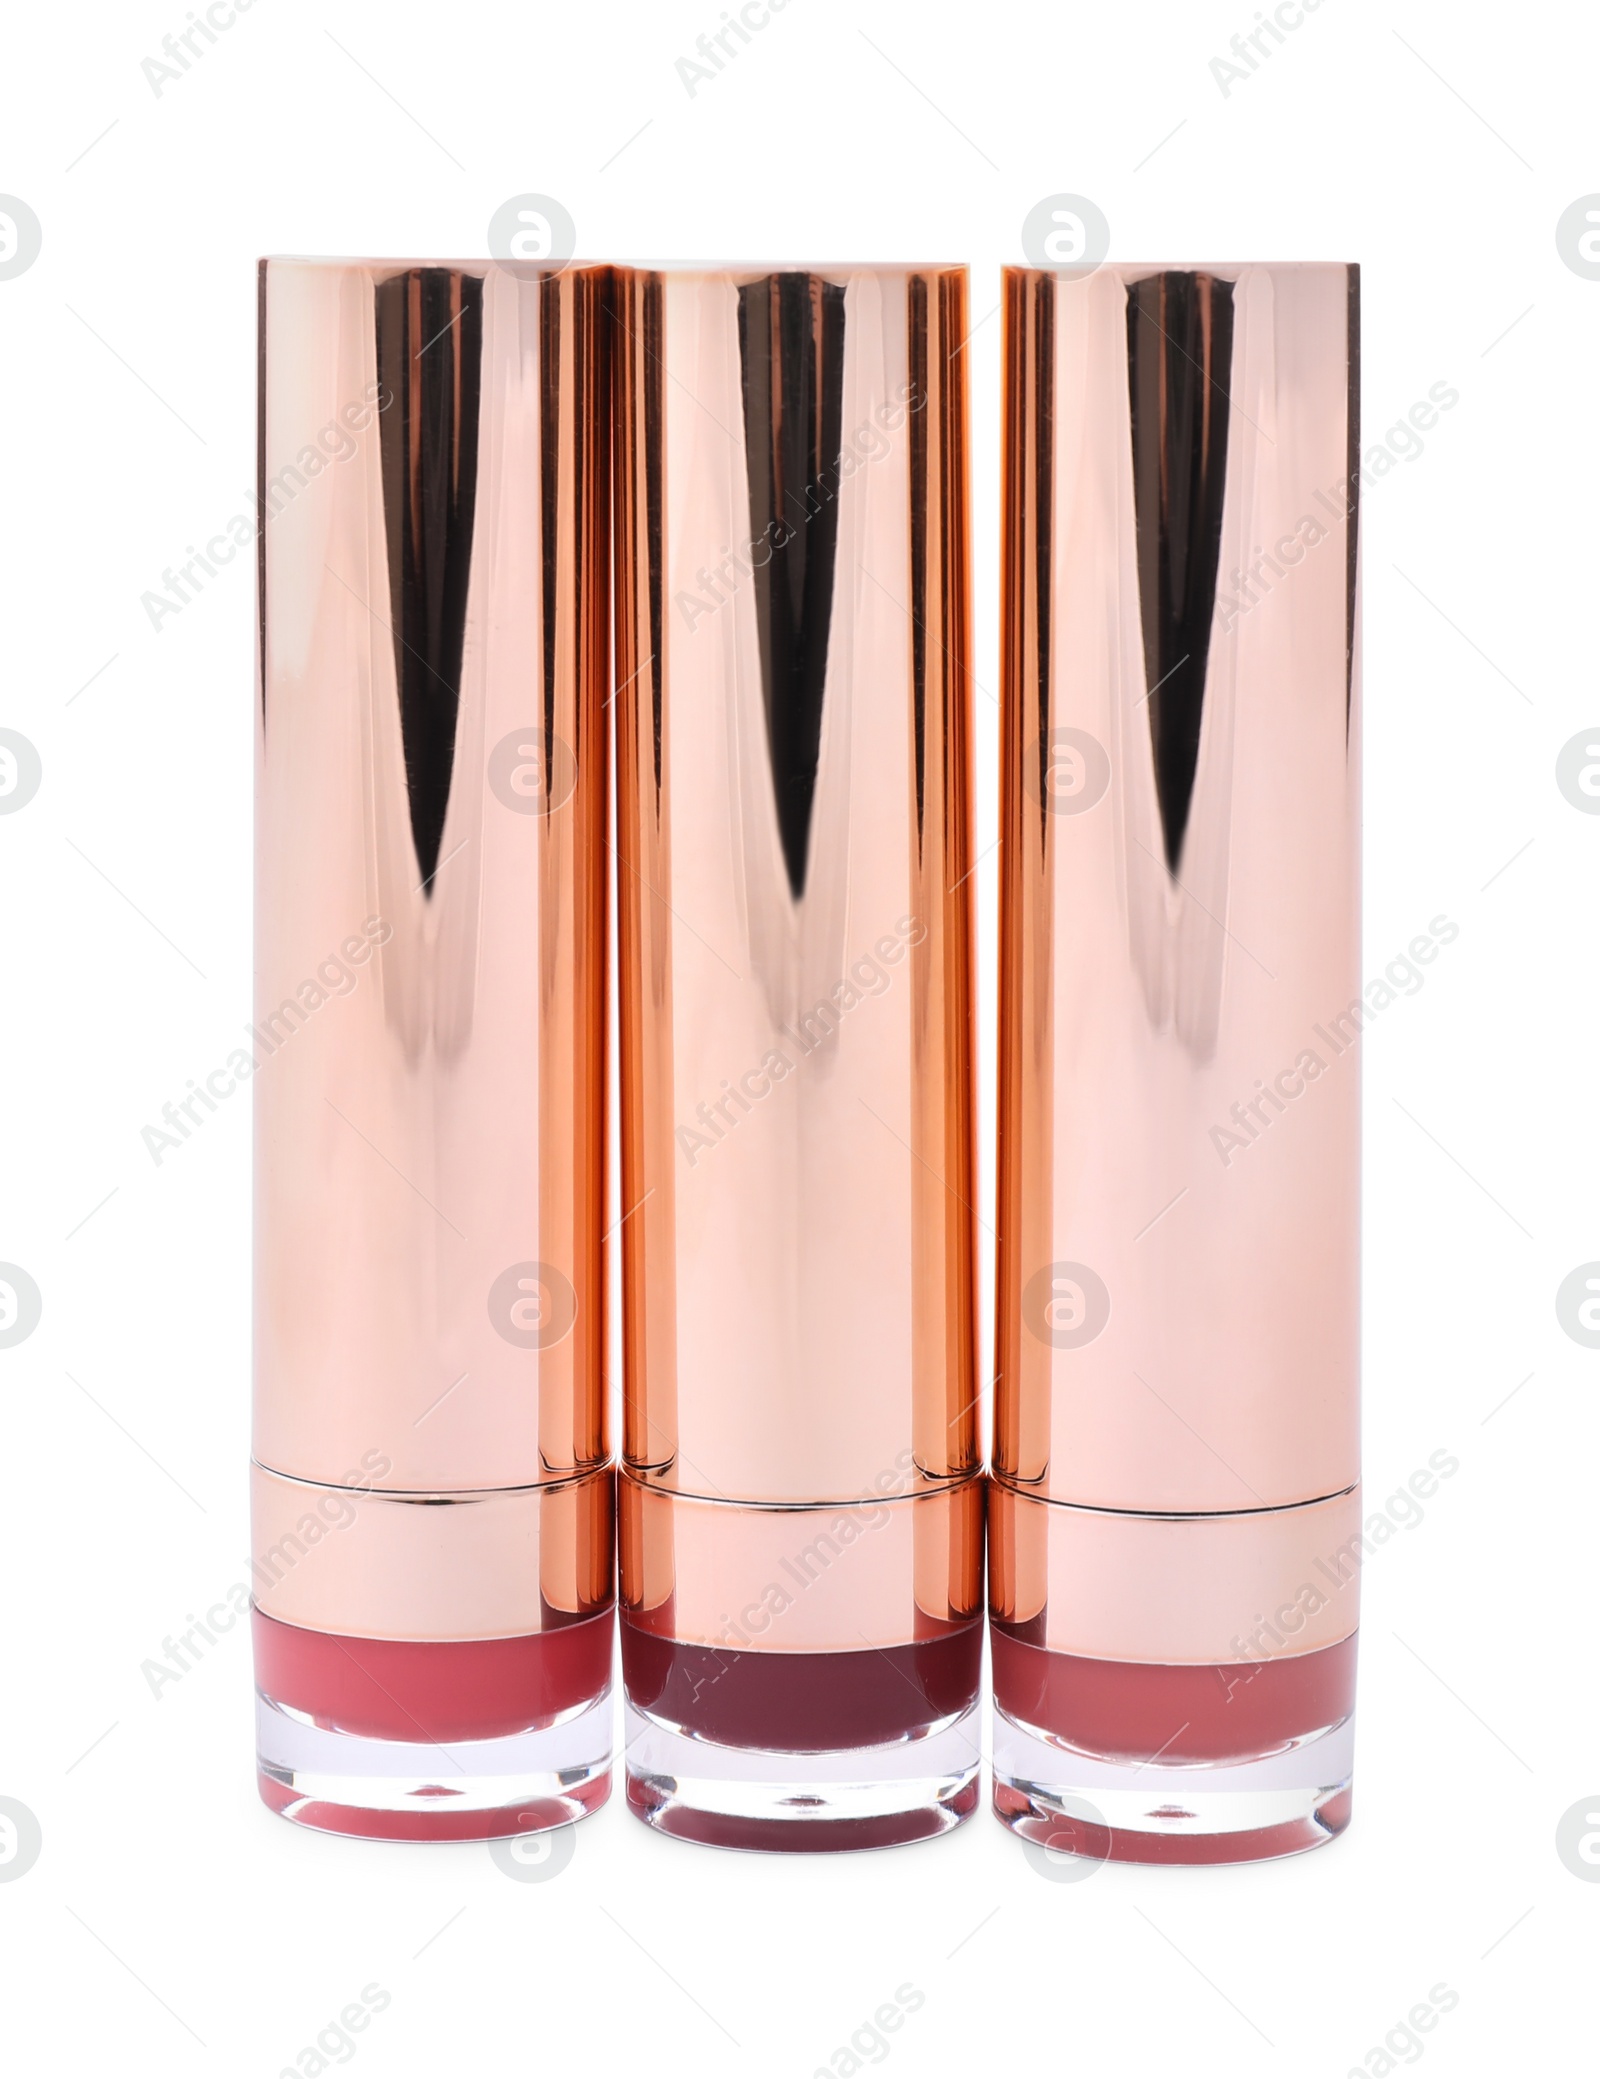 Photo of Different color lipsticks isolated on white. Makeup products